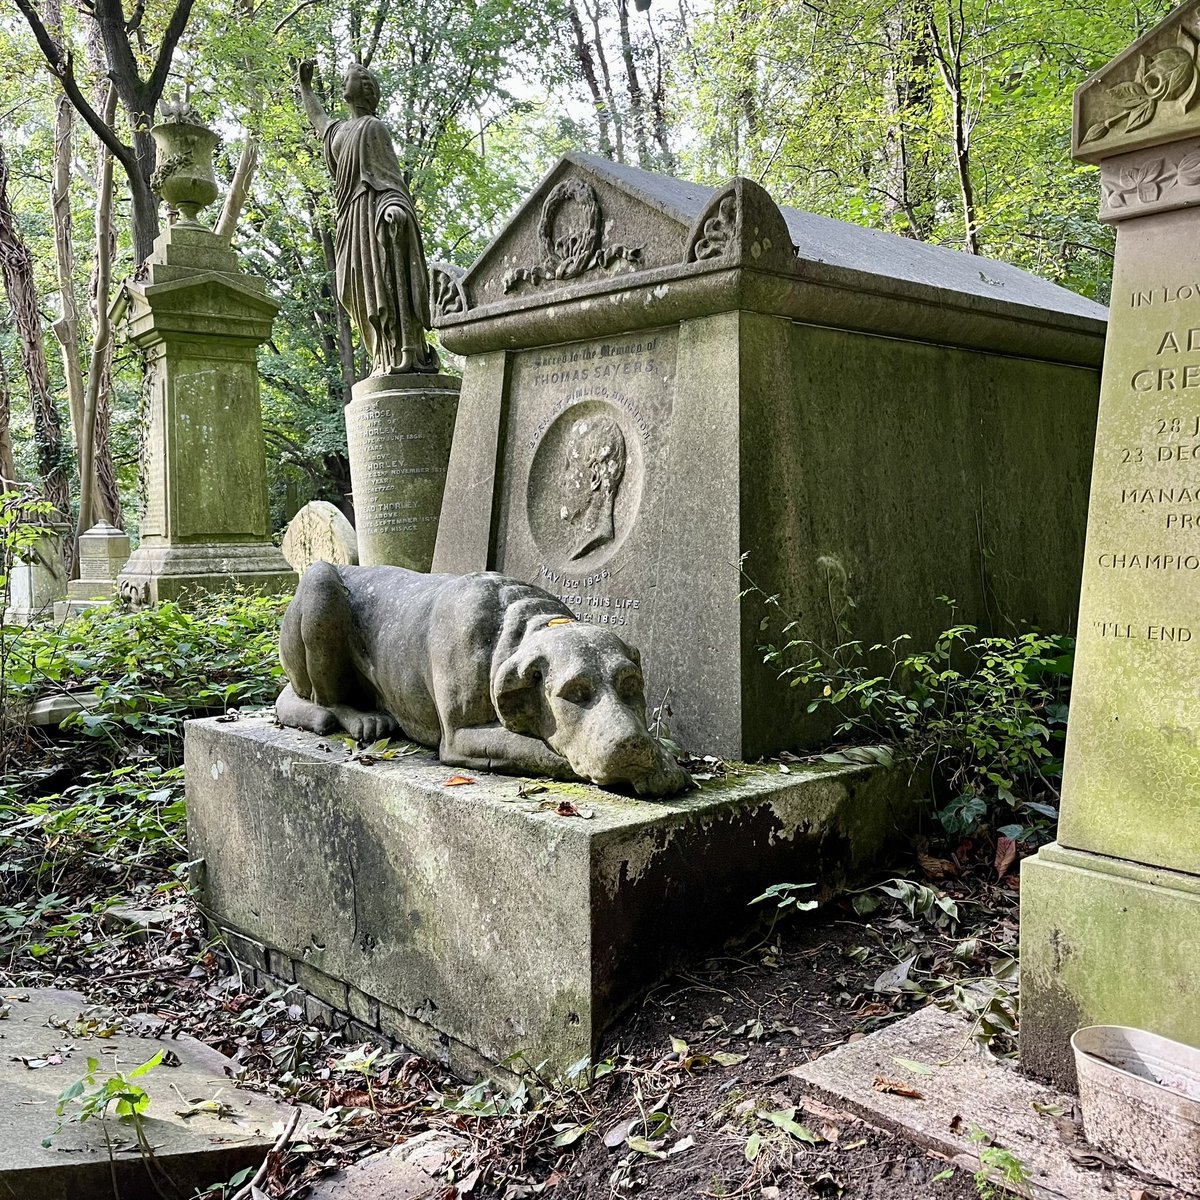 The tomb of Thomas Sayers (1826-1865) in Highgate Cemetery: a famous Victorian bare-knuckle boxing champion. His tomb is guarded by a sculpture of his pet dog, Lion.